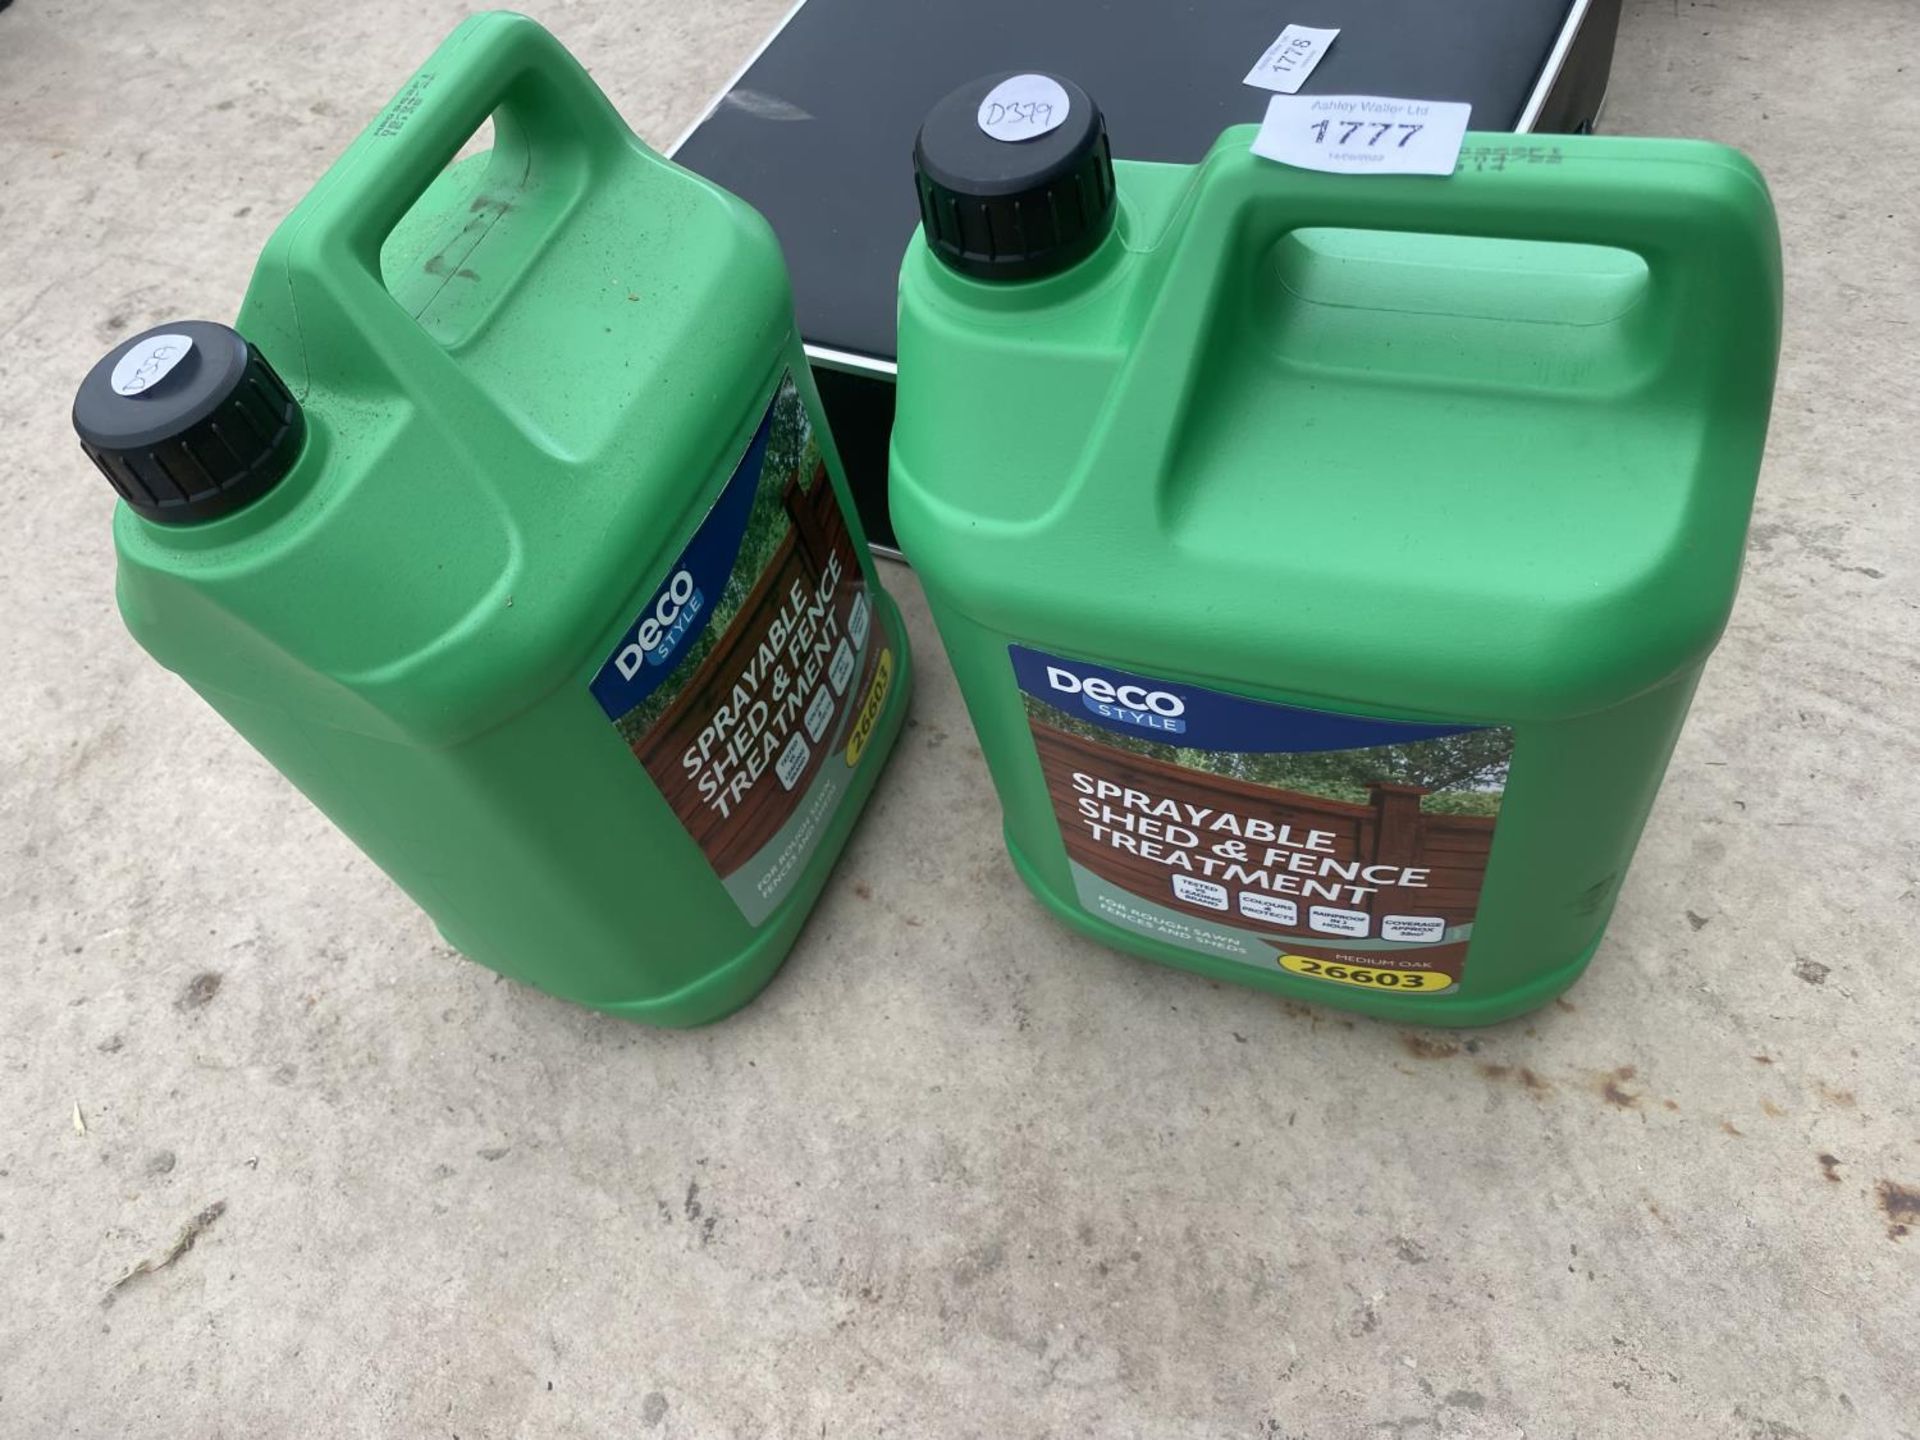 TWO 5 LITRE DRUMS OF DECO SPRAYABLE FENCE AND SHED TREATMENT